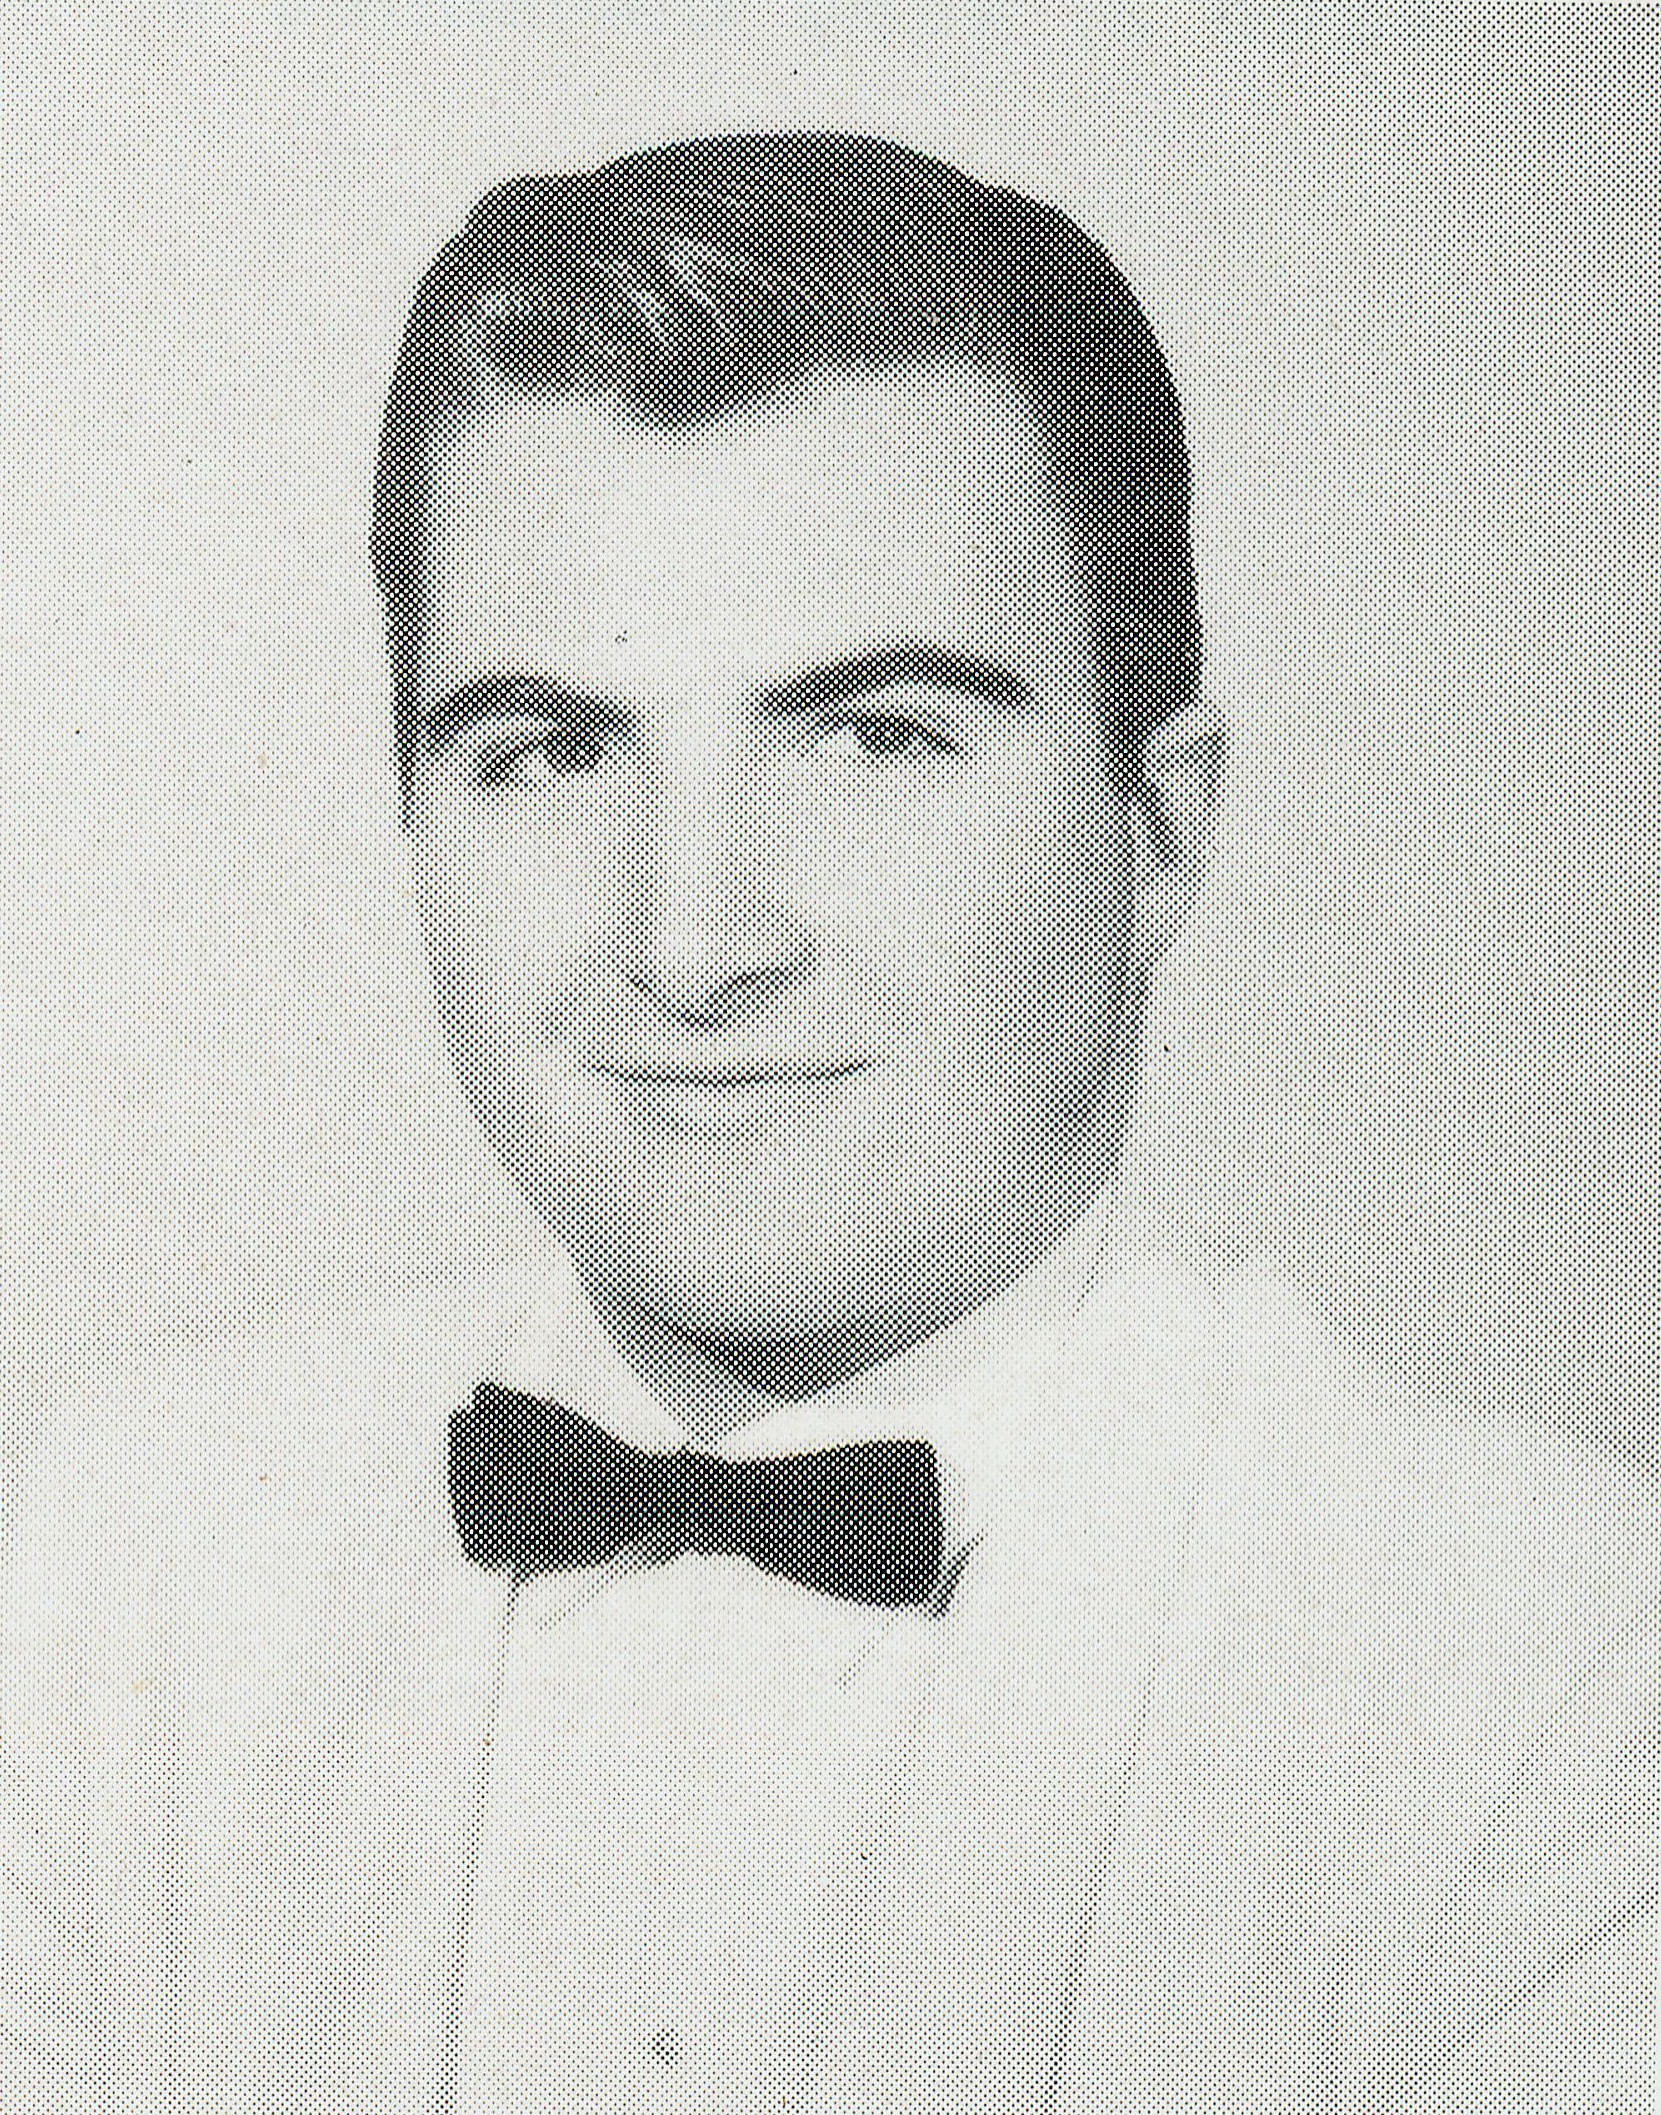 Harvey C. Seevers
March 16, 1987